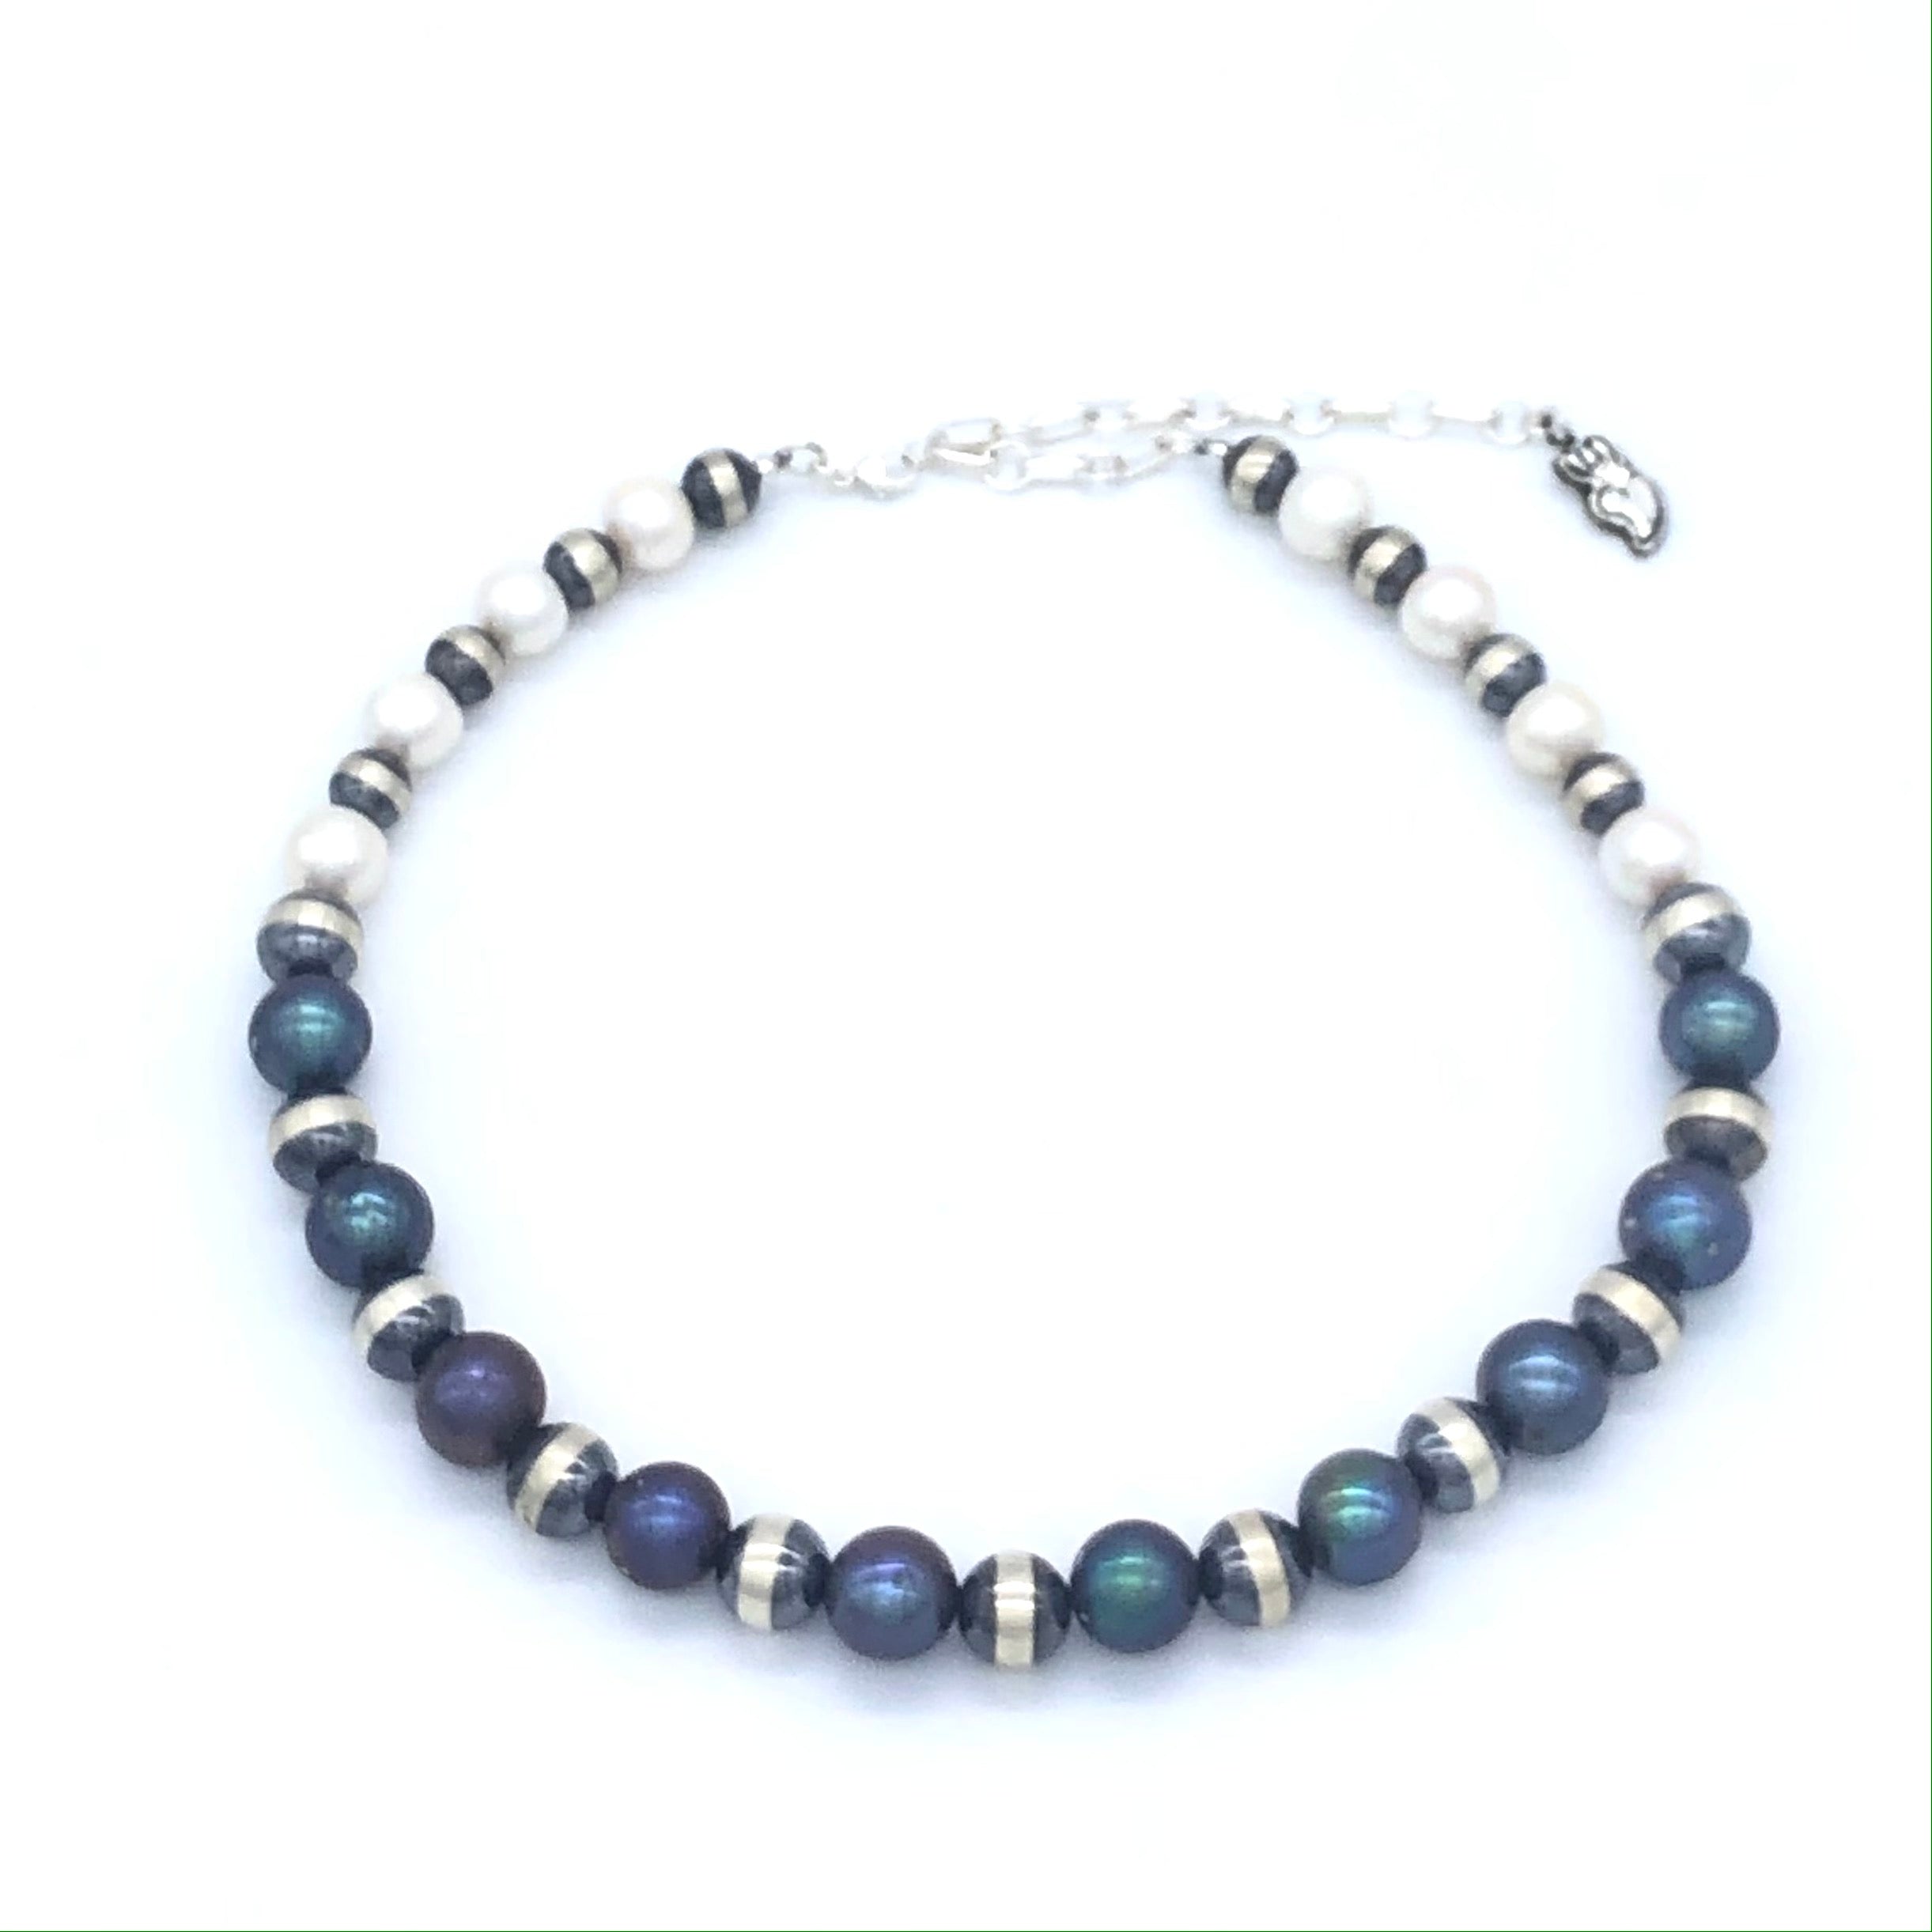 PN1 Black and White Pearl Necklace